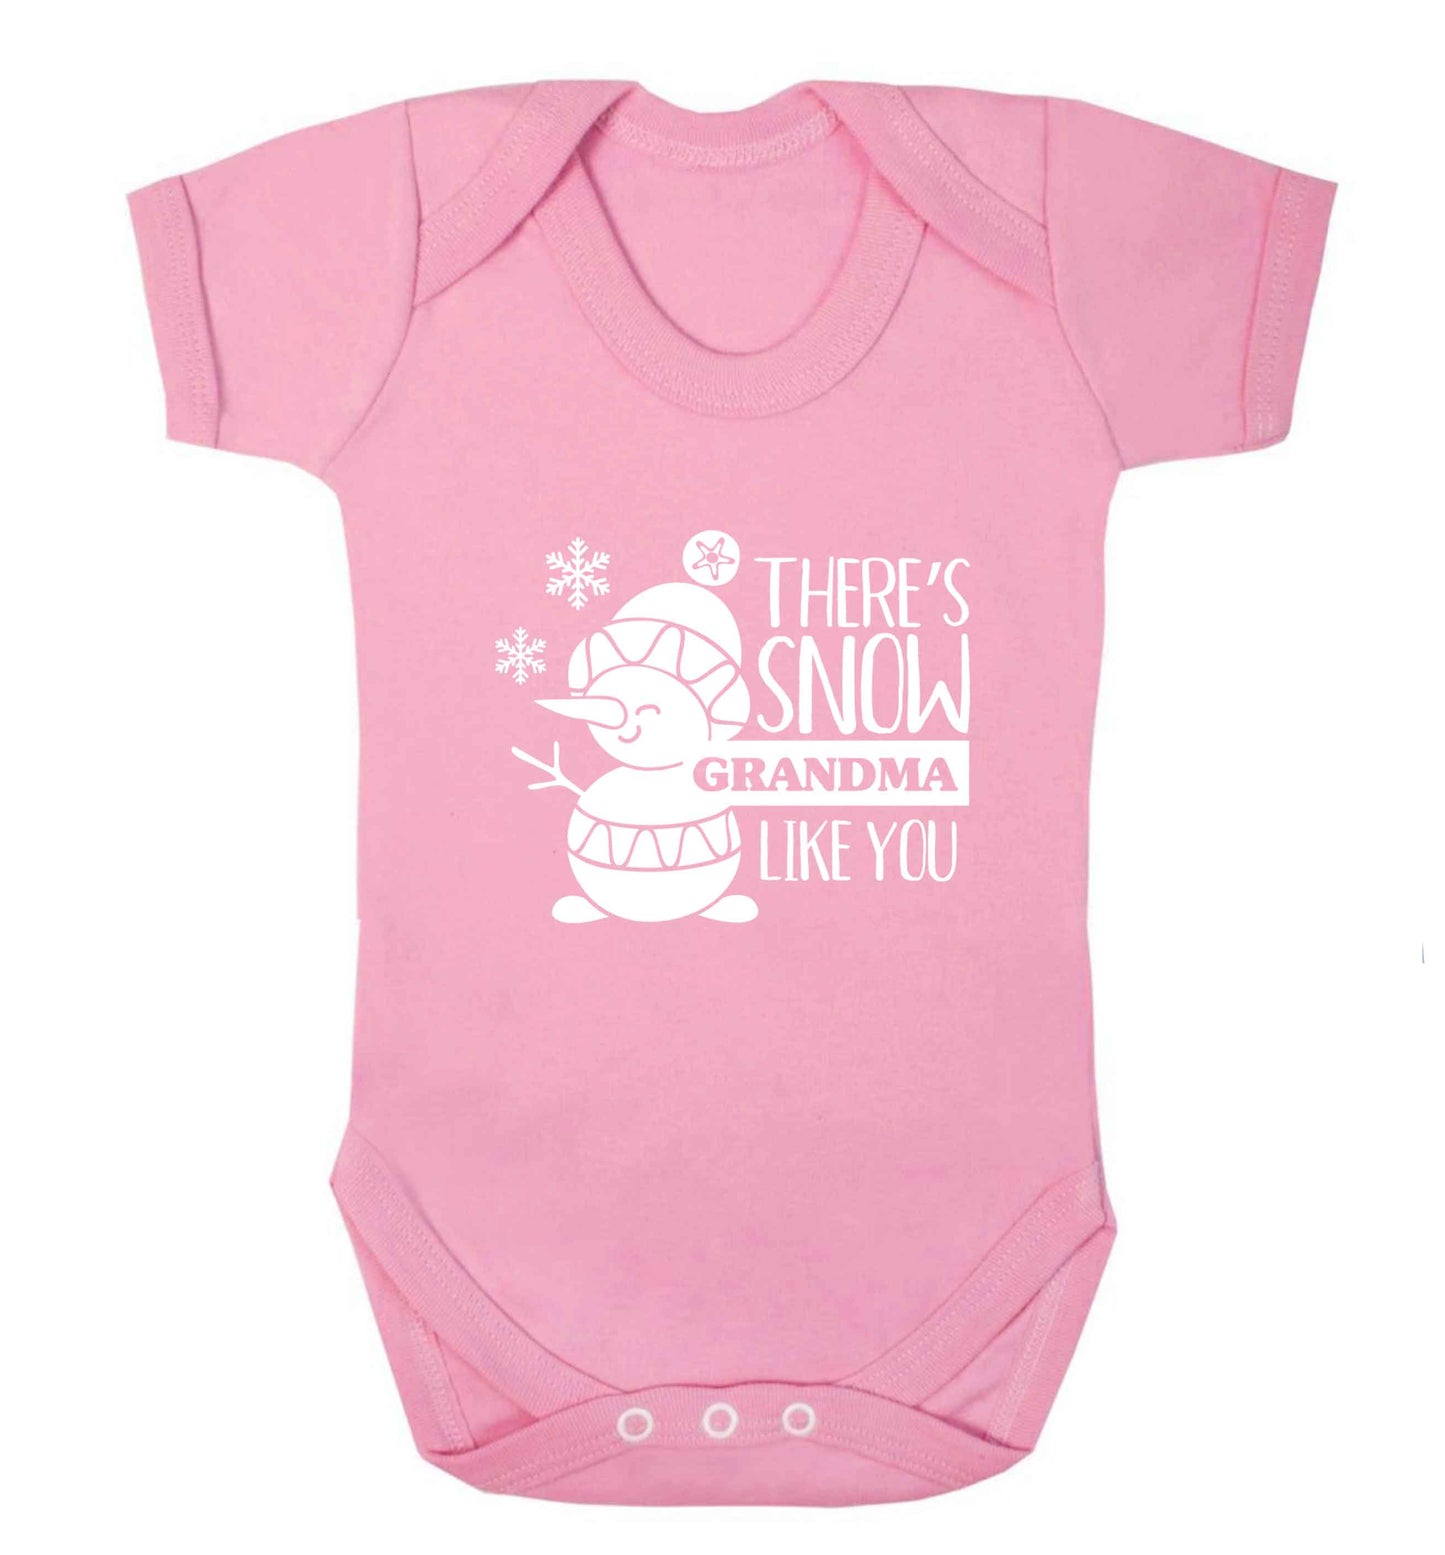 There's snow grandma like you baby vest pale pink 18-24 months